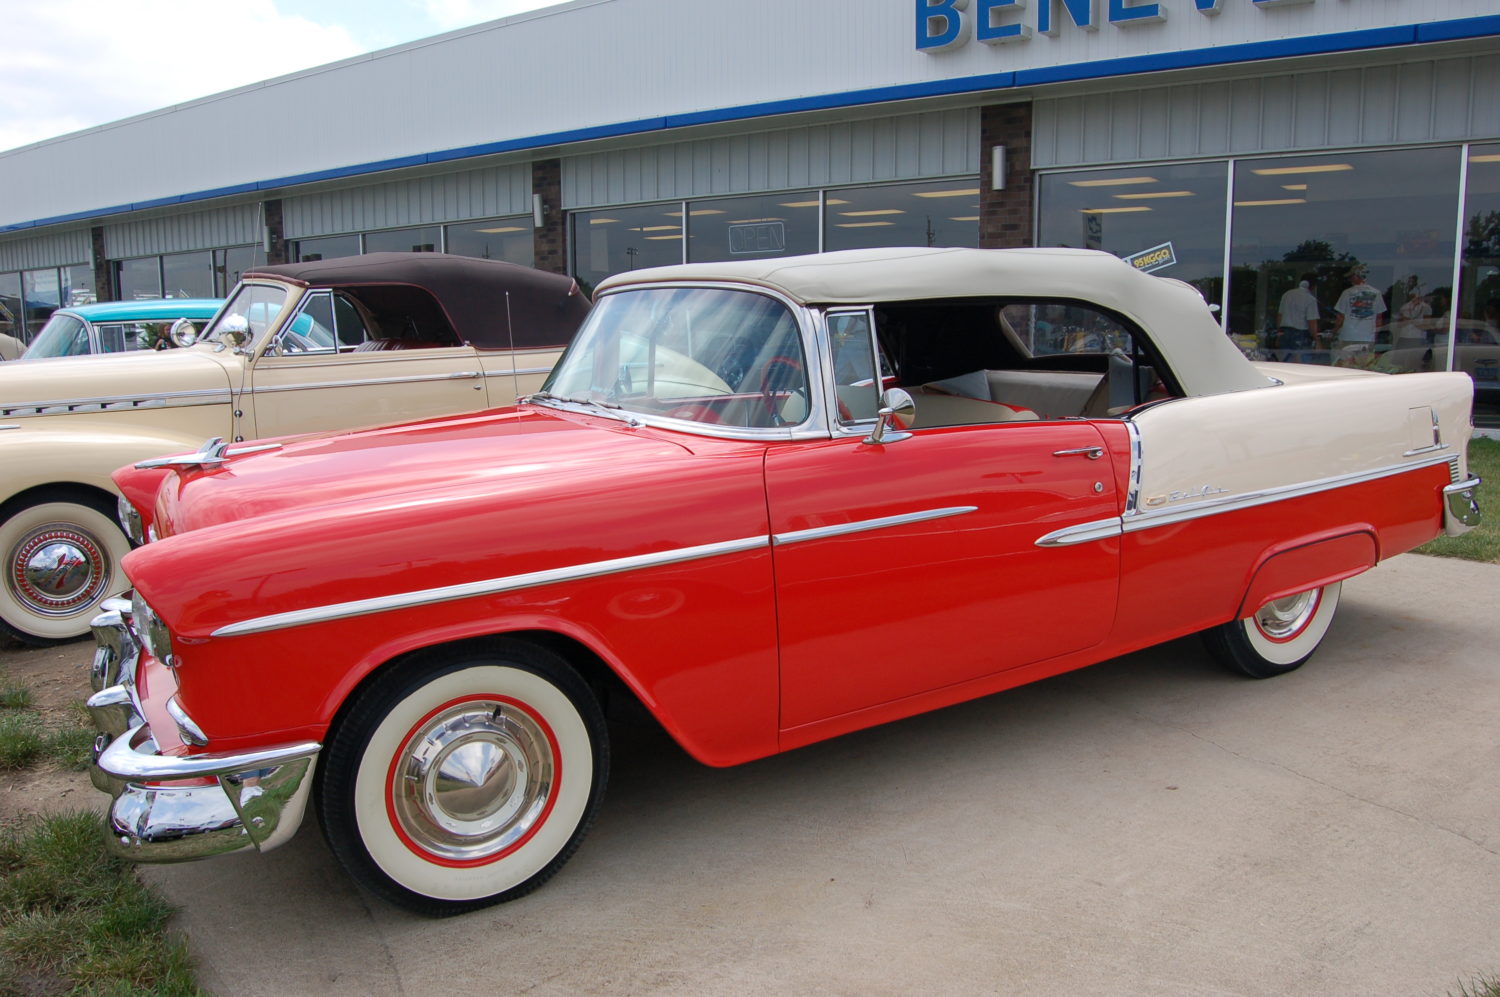 Fabulous Chevrolet Collector Cars- The Don Beneventi Collection- LIVE Onsite and Online Bidding - image 4